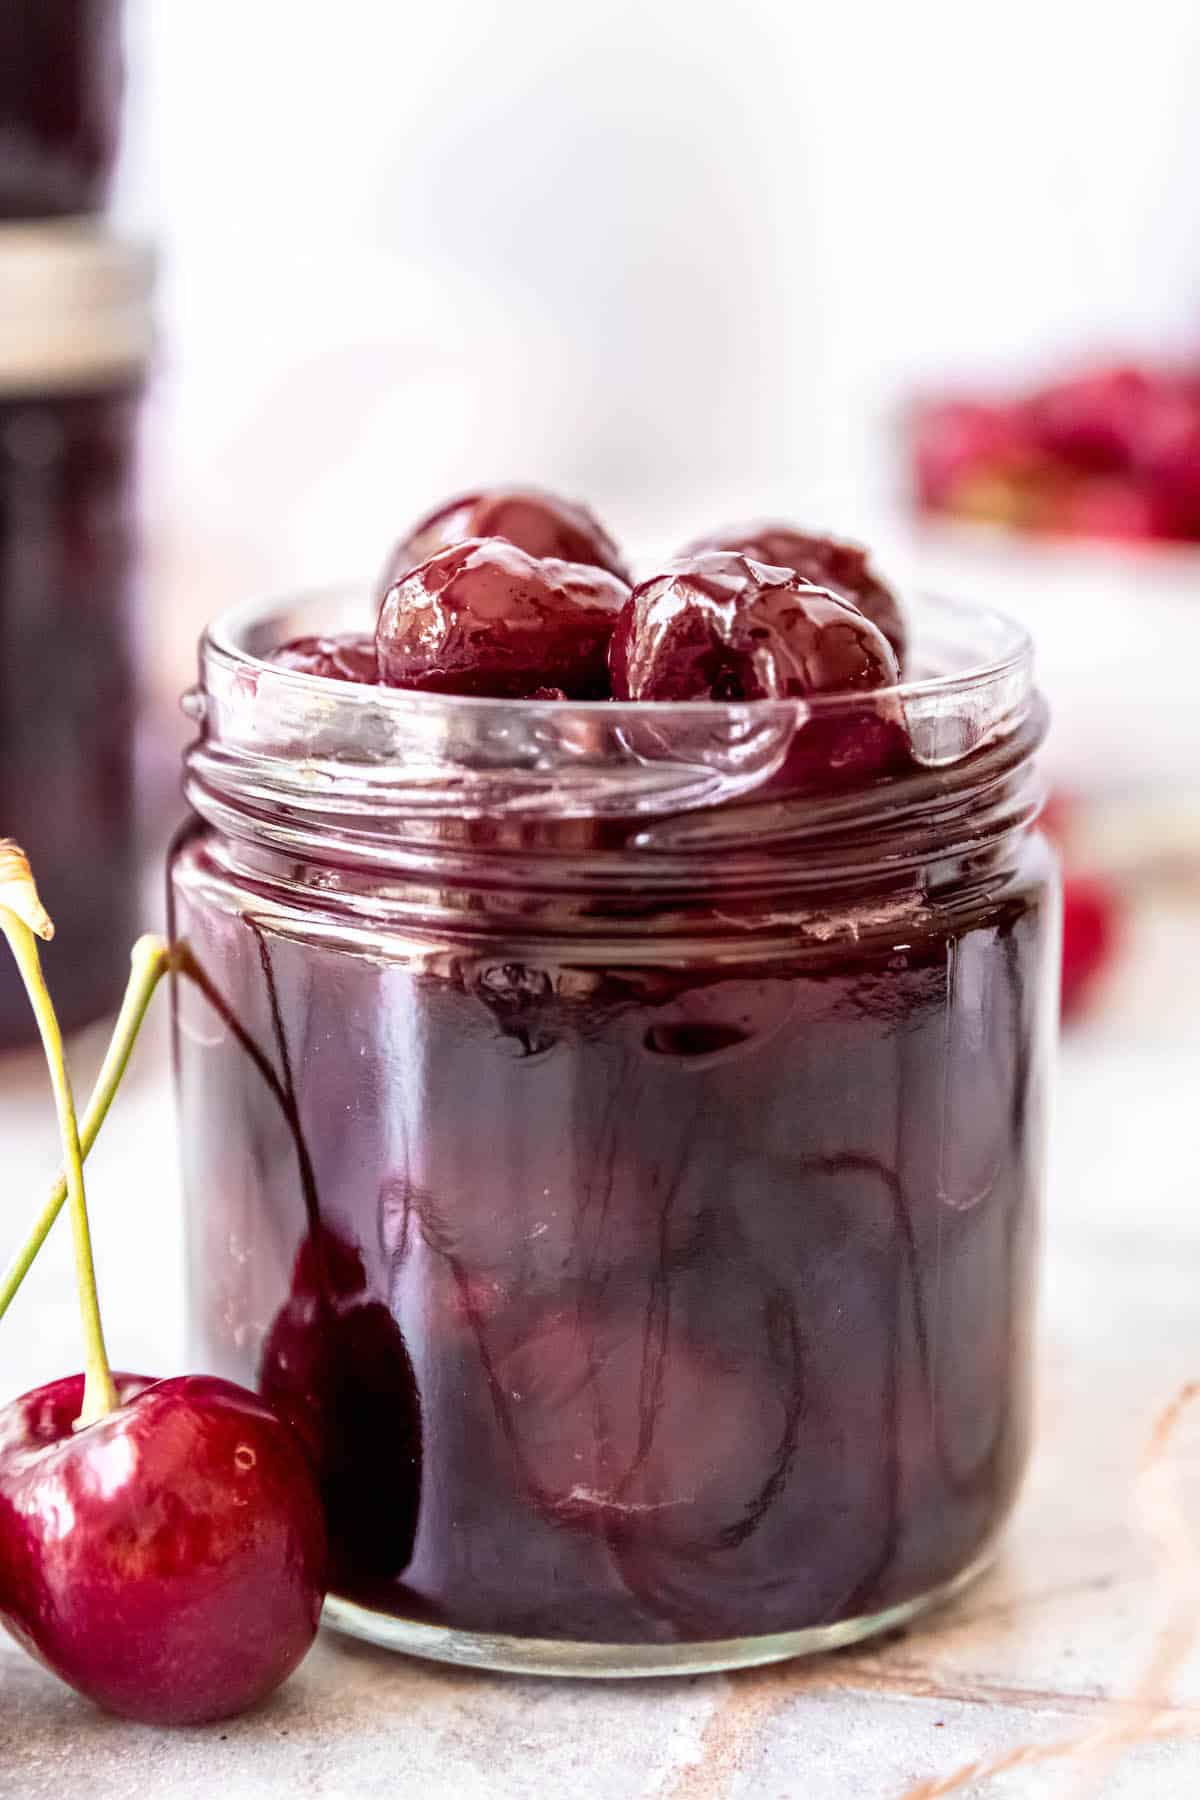 open glass jar of homemade amaretto cherries with a few jars of them stacked in the background and a bowl of fresh cherries blurred out.